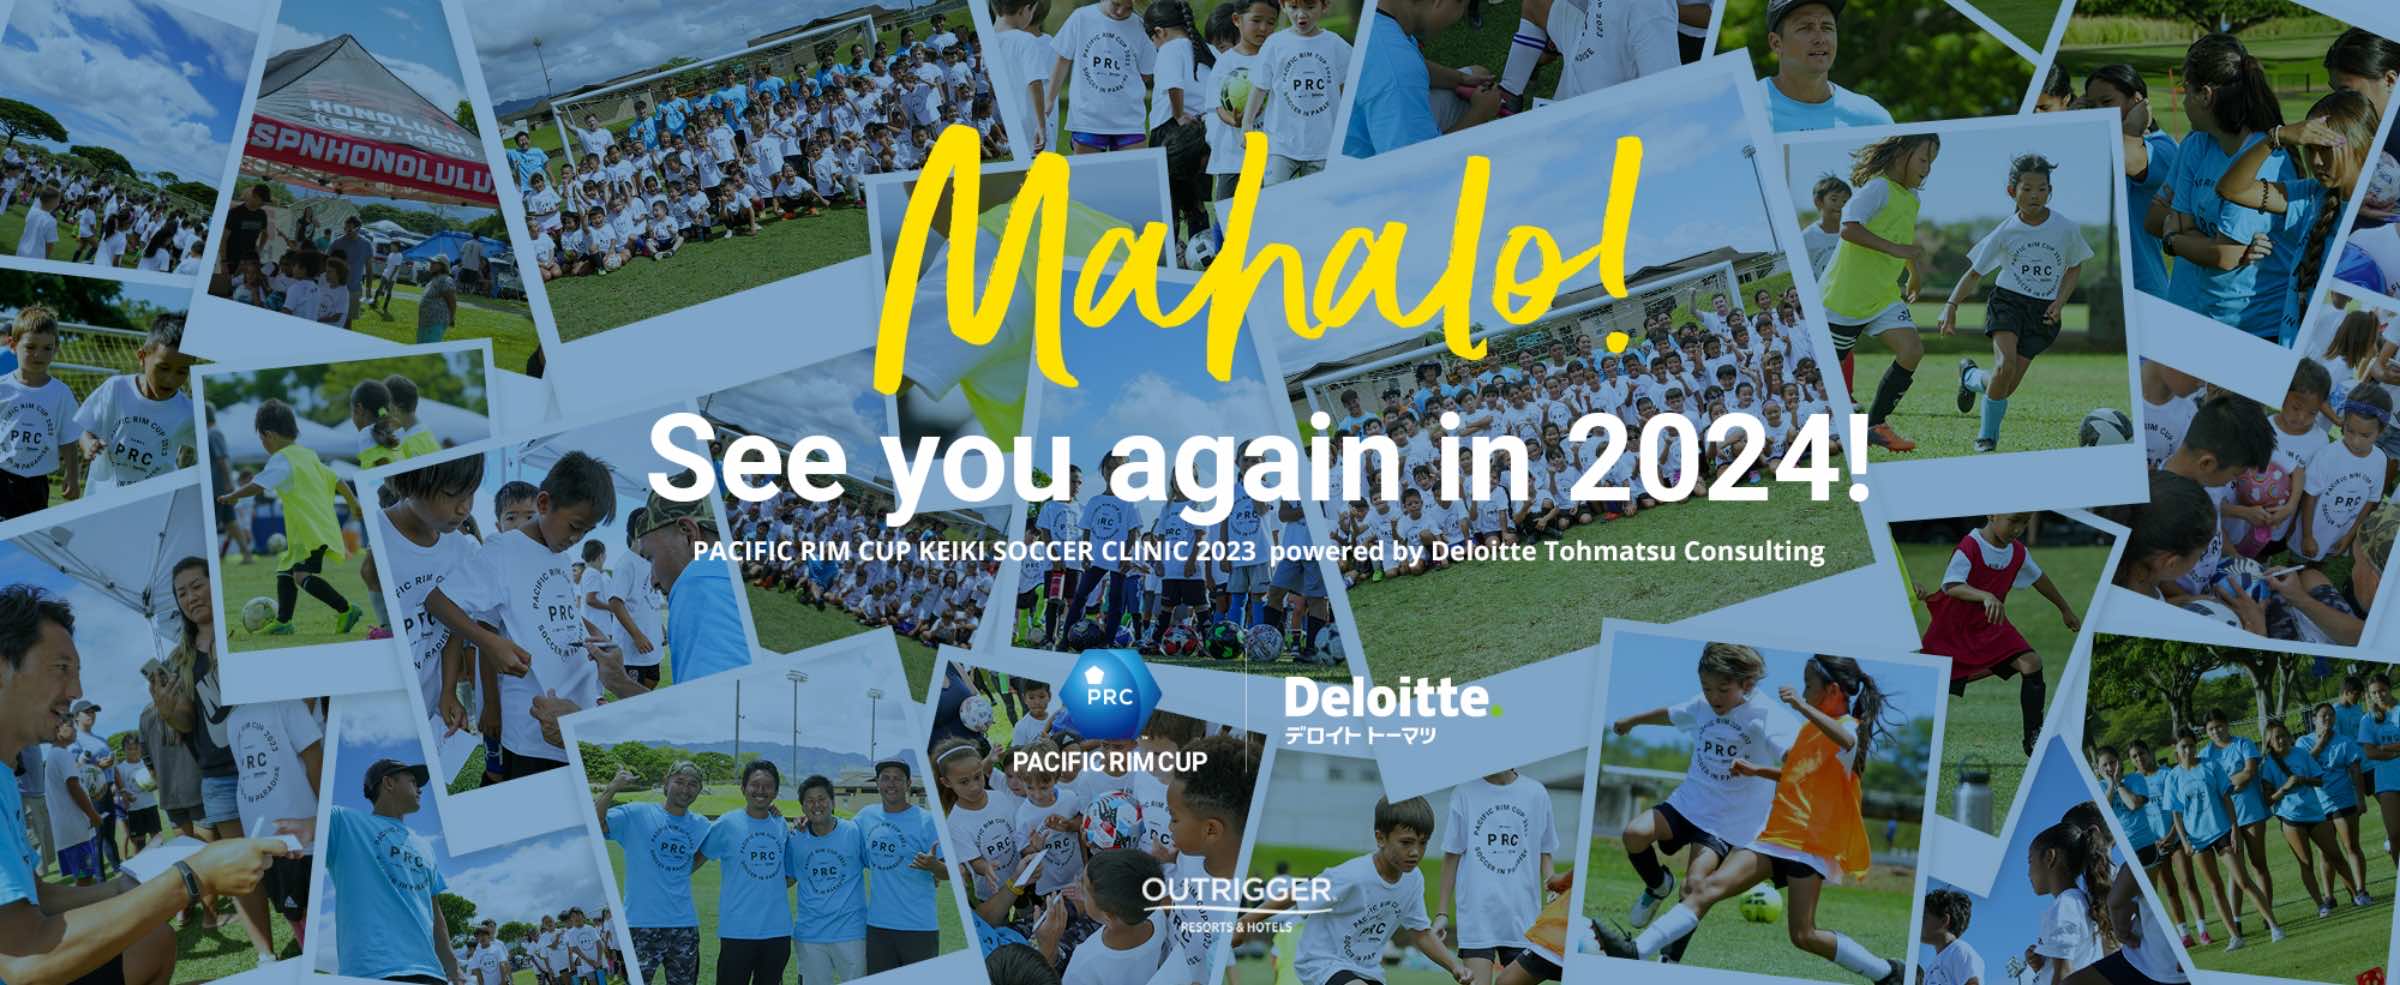 Mahalo! See you again in 2024! PACIFIC RIM CUP KEIKI SOCCER CLINIC powered by Deloitte Tohmatsu Consulting PACIFICRIMCUP Deloitte デロイトトーマツ OUTRIGGER